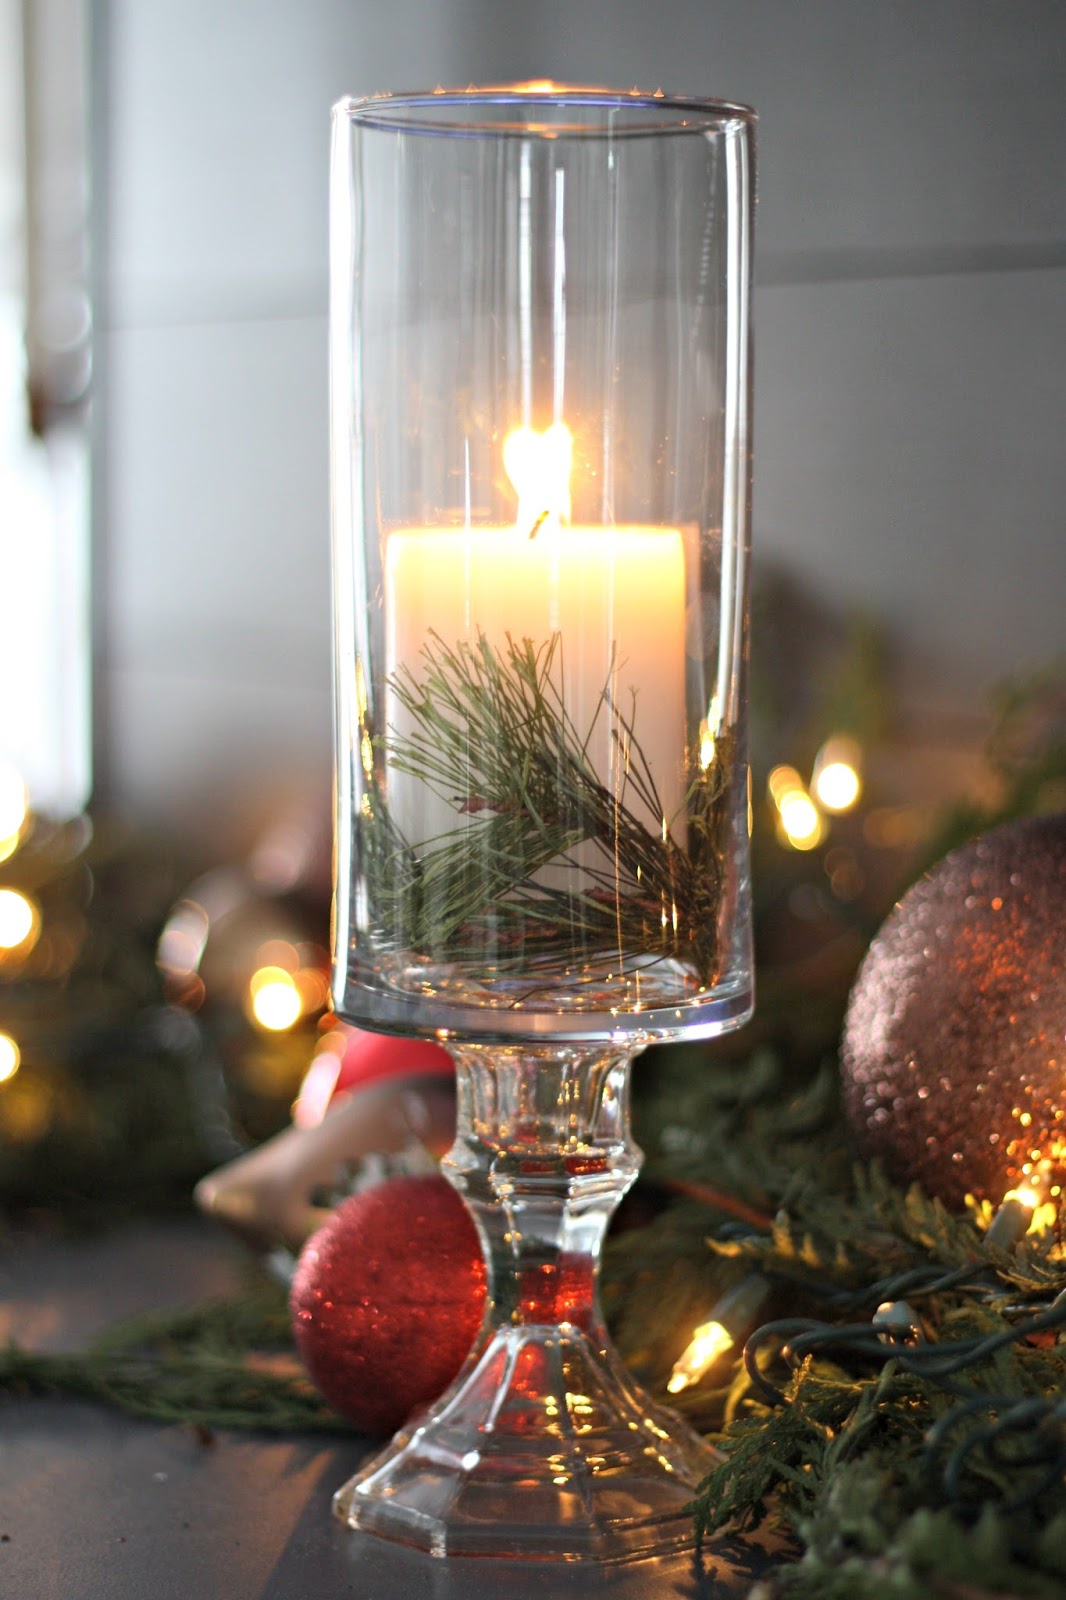 DIY dollar store pedestal candle with greenery